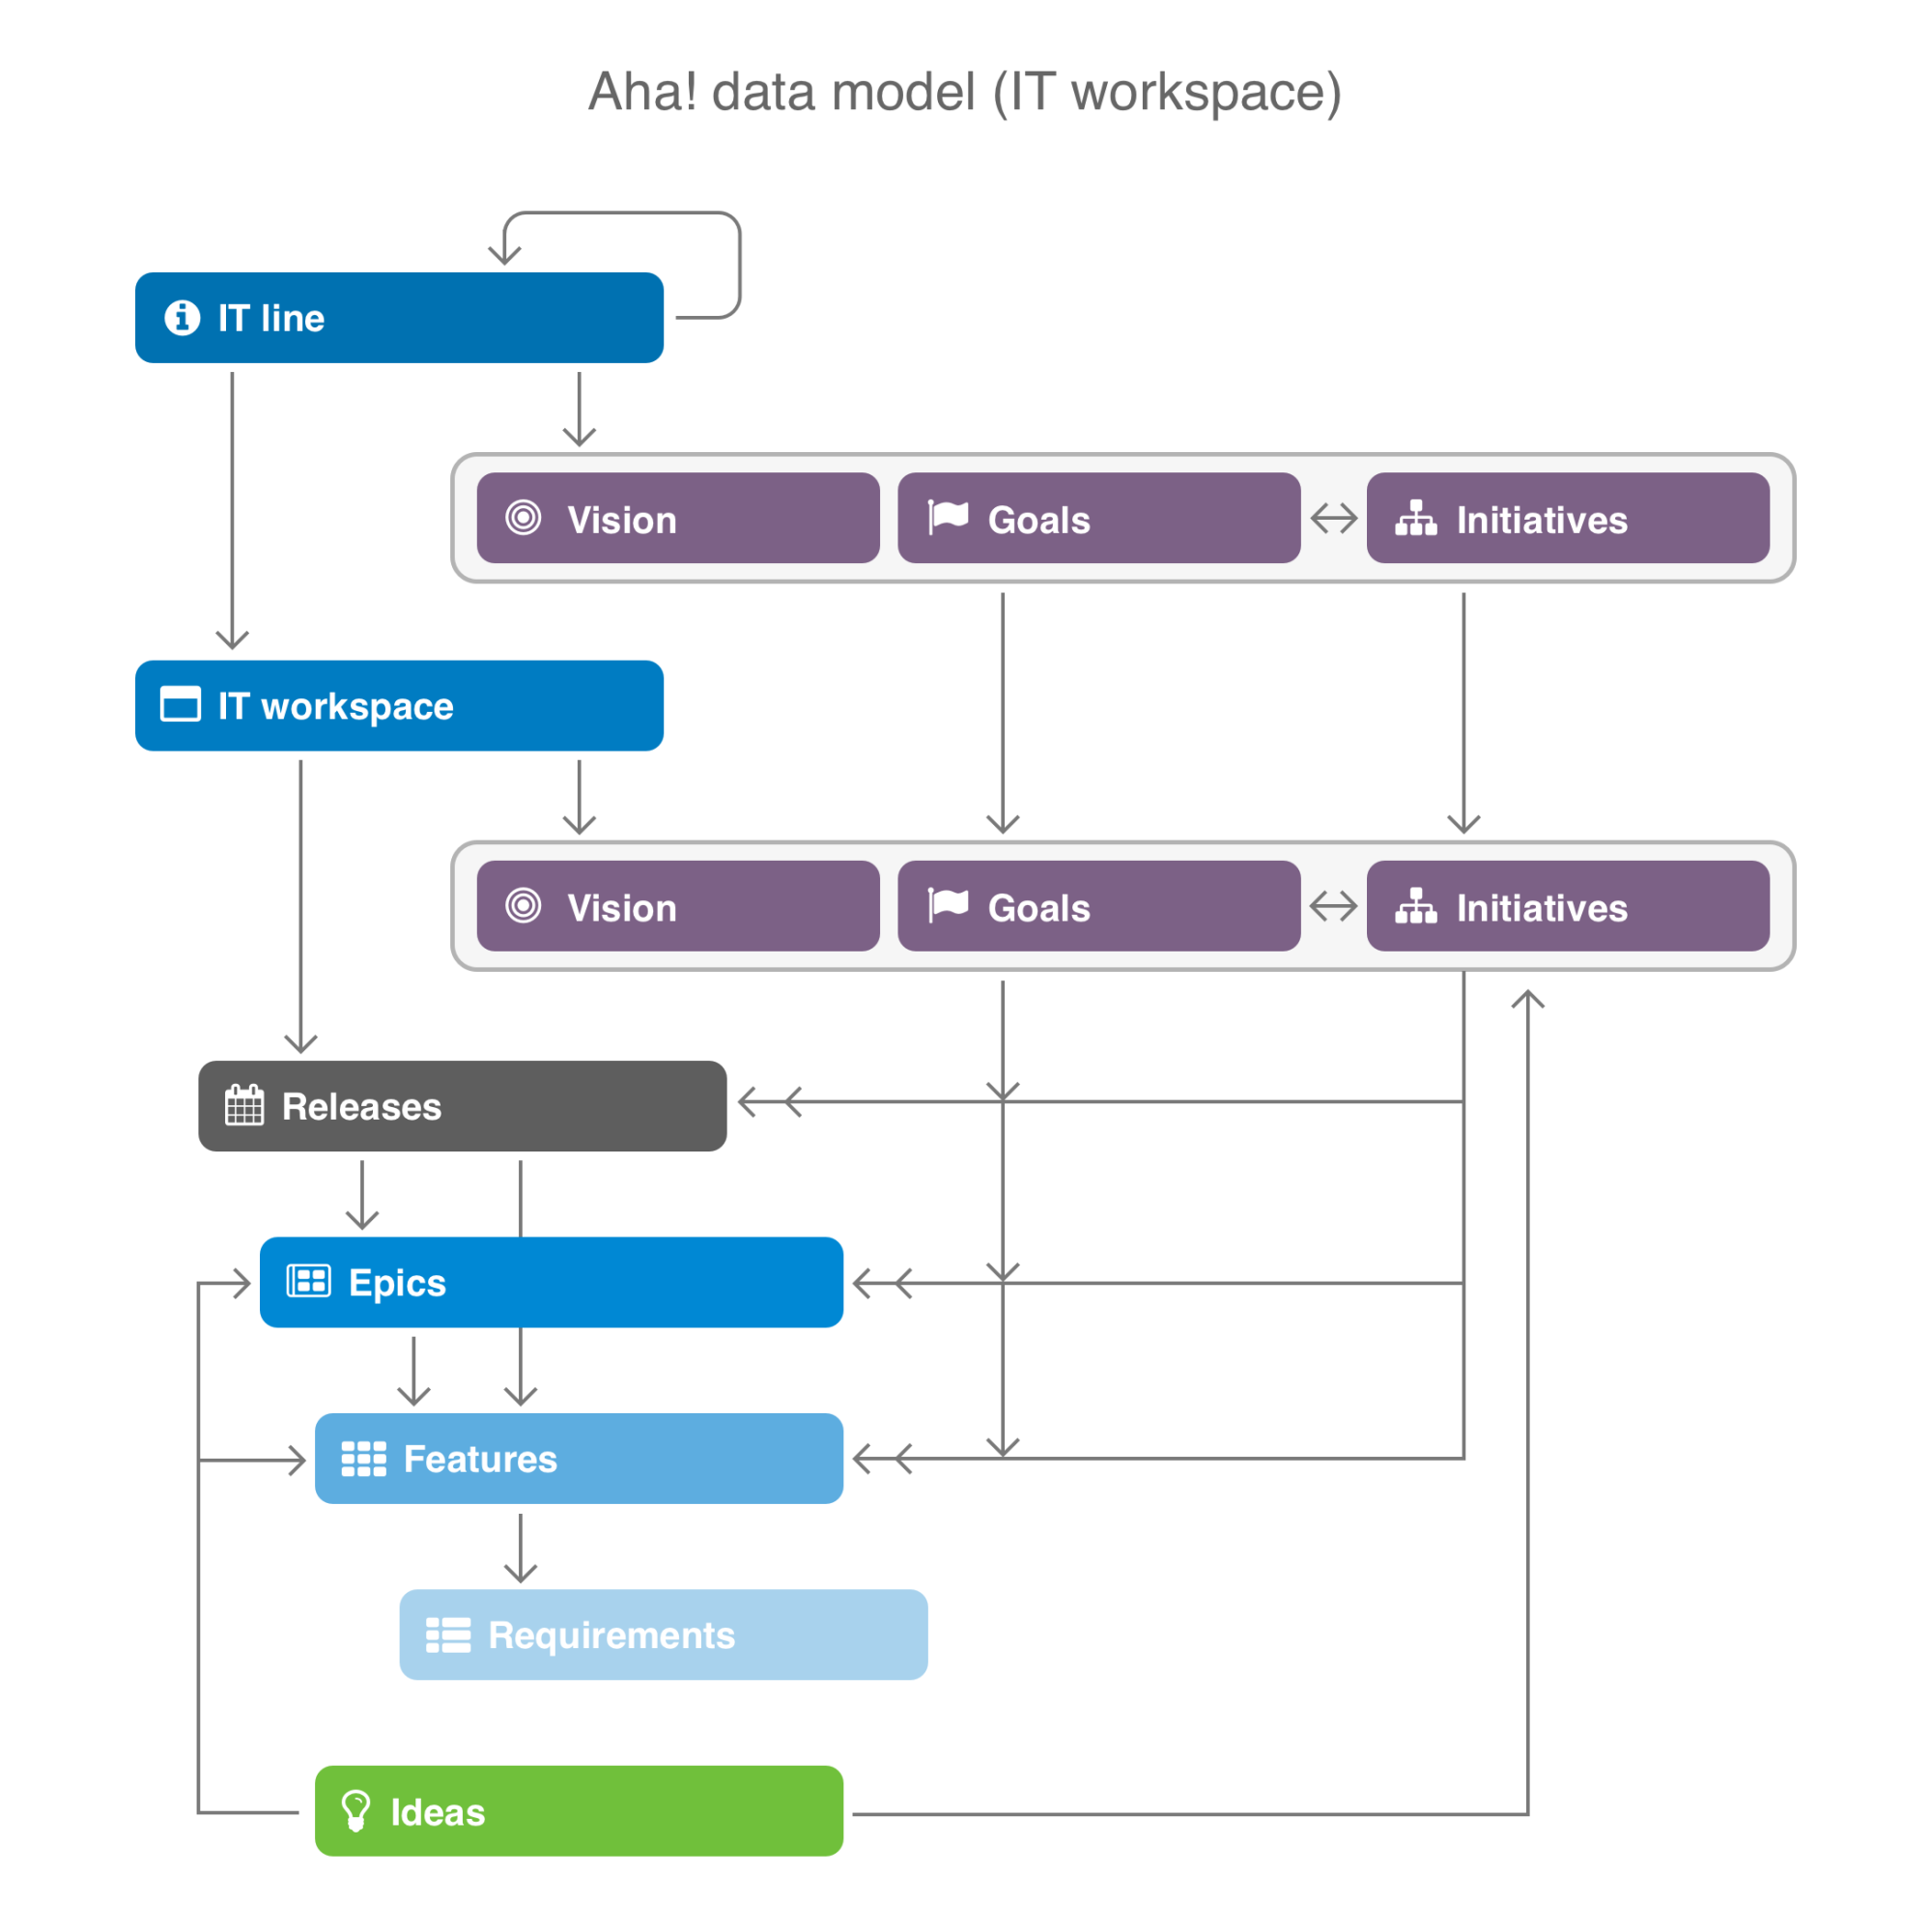 Flowchart of the Aha! Roadmaps data model for the IT workspace type.